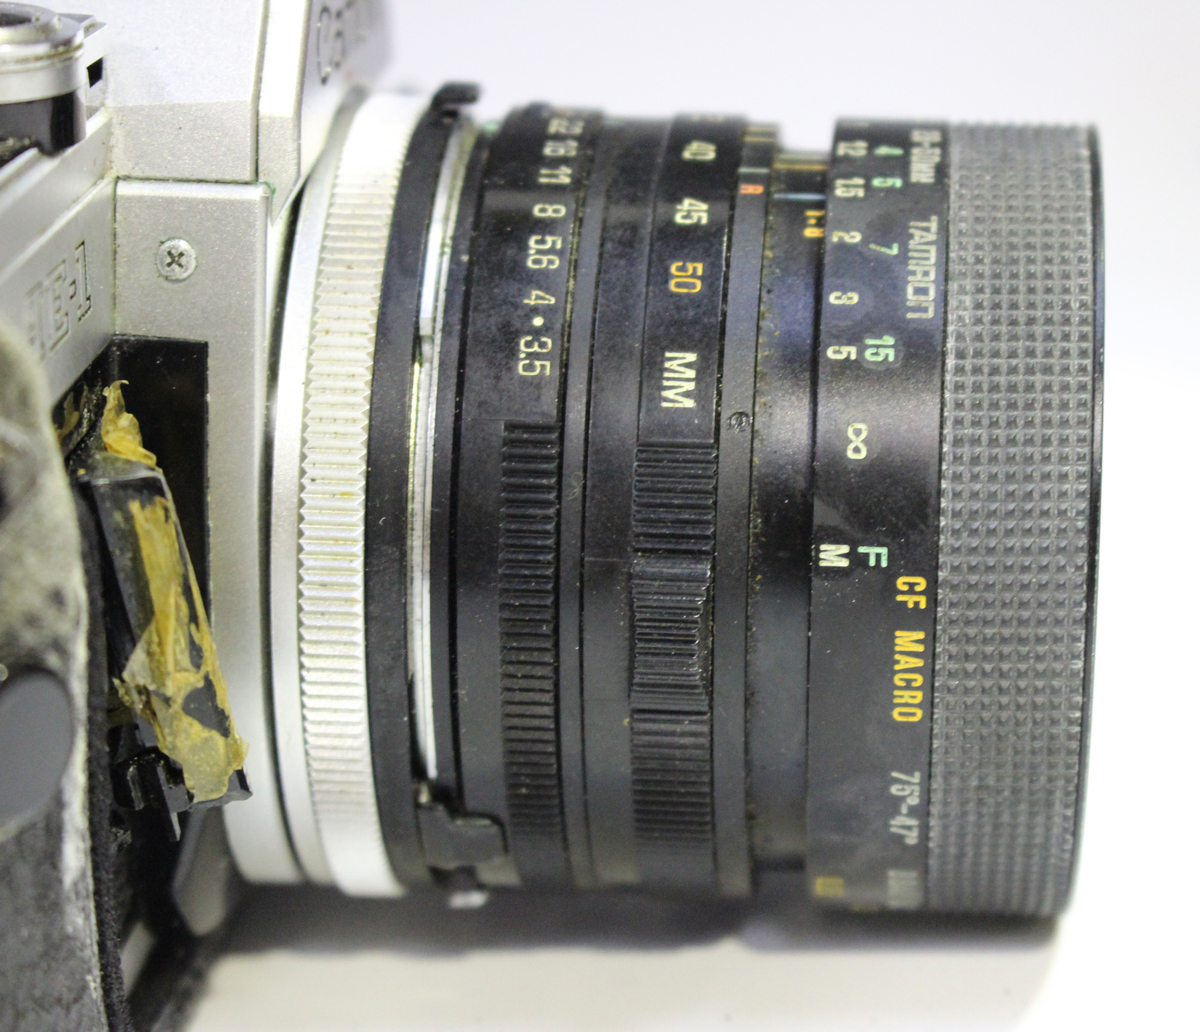 A Canon AE-1 camera, No. 4330844, with Tamron 1:3.5-4.5 28-50mm lens, together with a Tamron 1:3.8 - Image 6 of 14